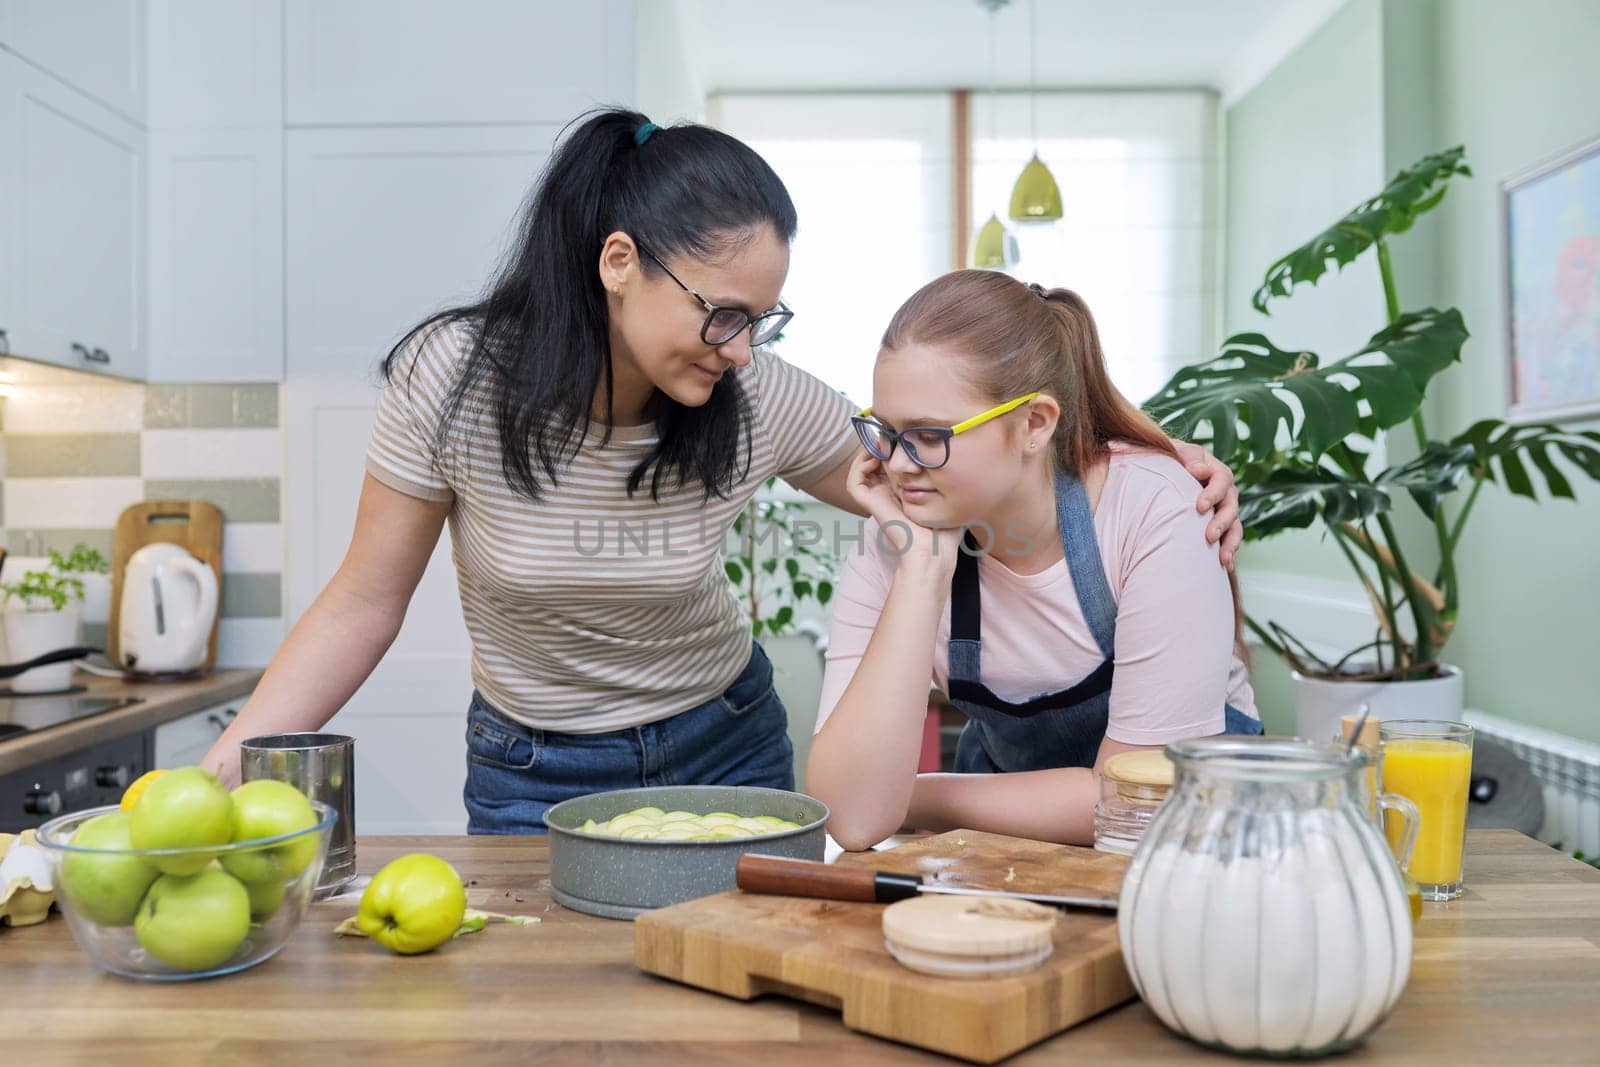 Mother and teenage daughter cooking at home in kitchen. Mom and girl making apple pie together, talking smiling. Relationships, communication parent teenager, healthy homemade food, family concept